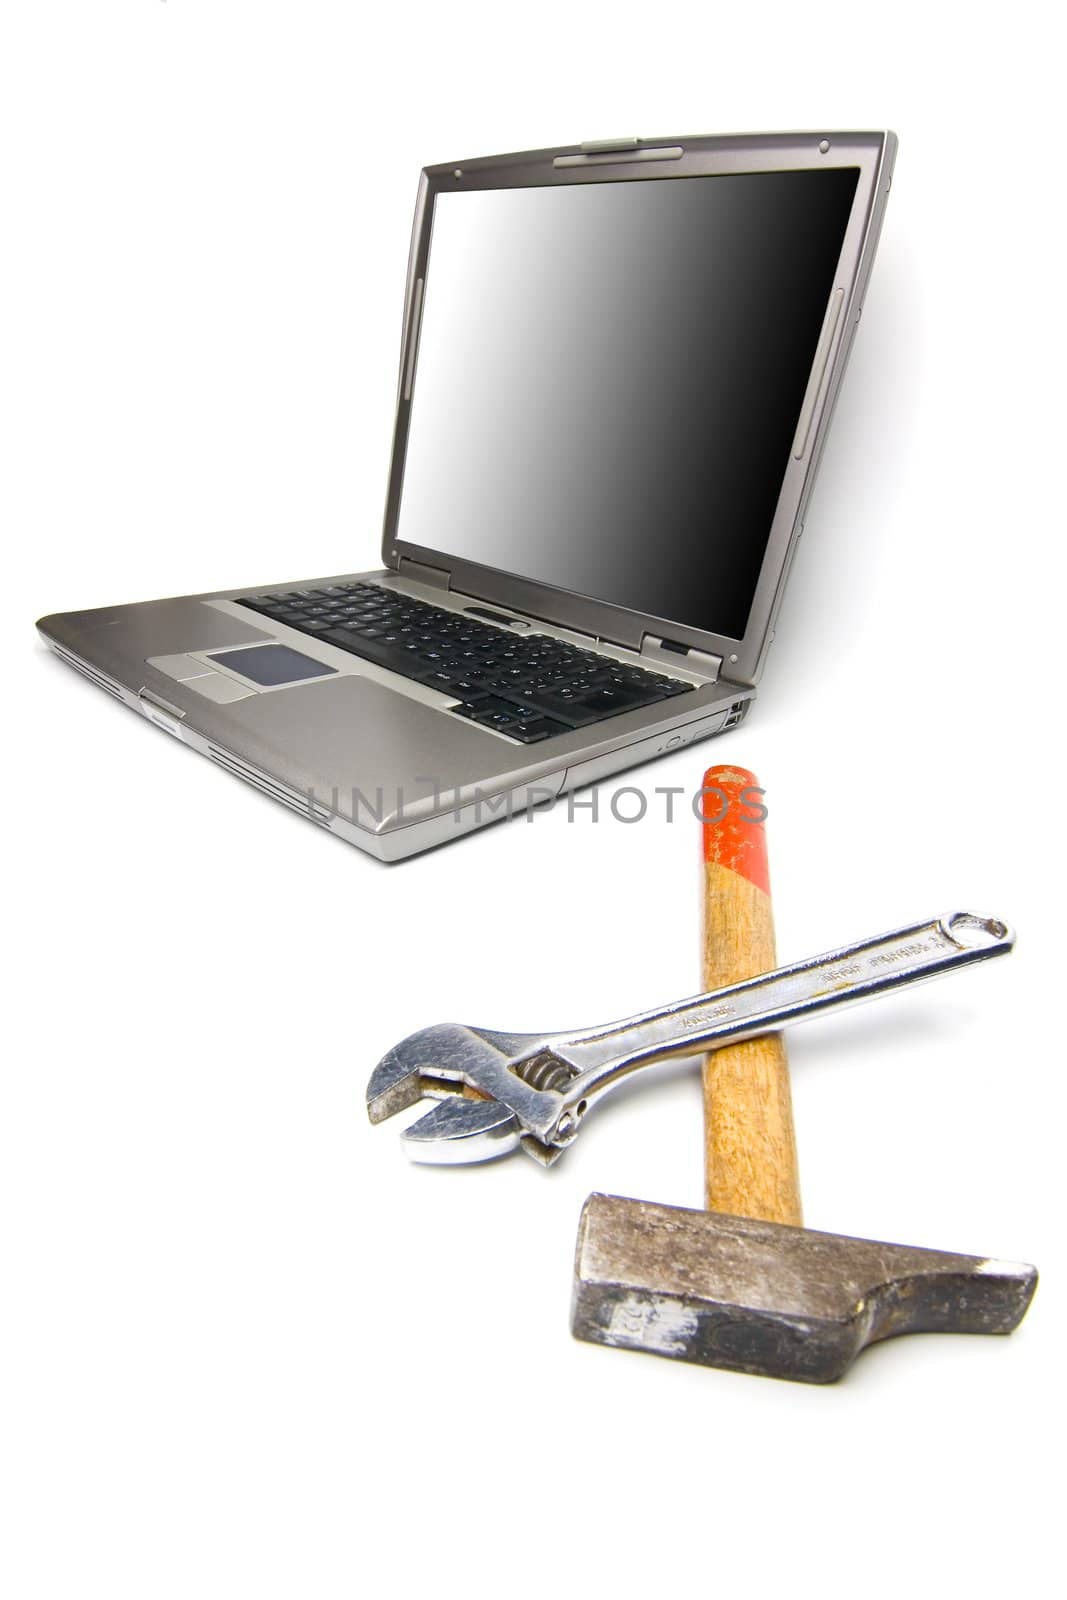 conceptual technology and help. Computer and tools.